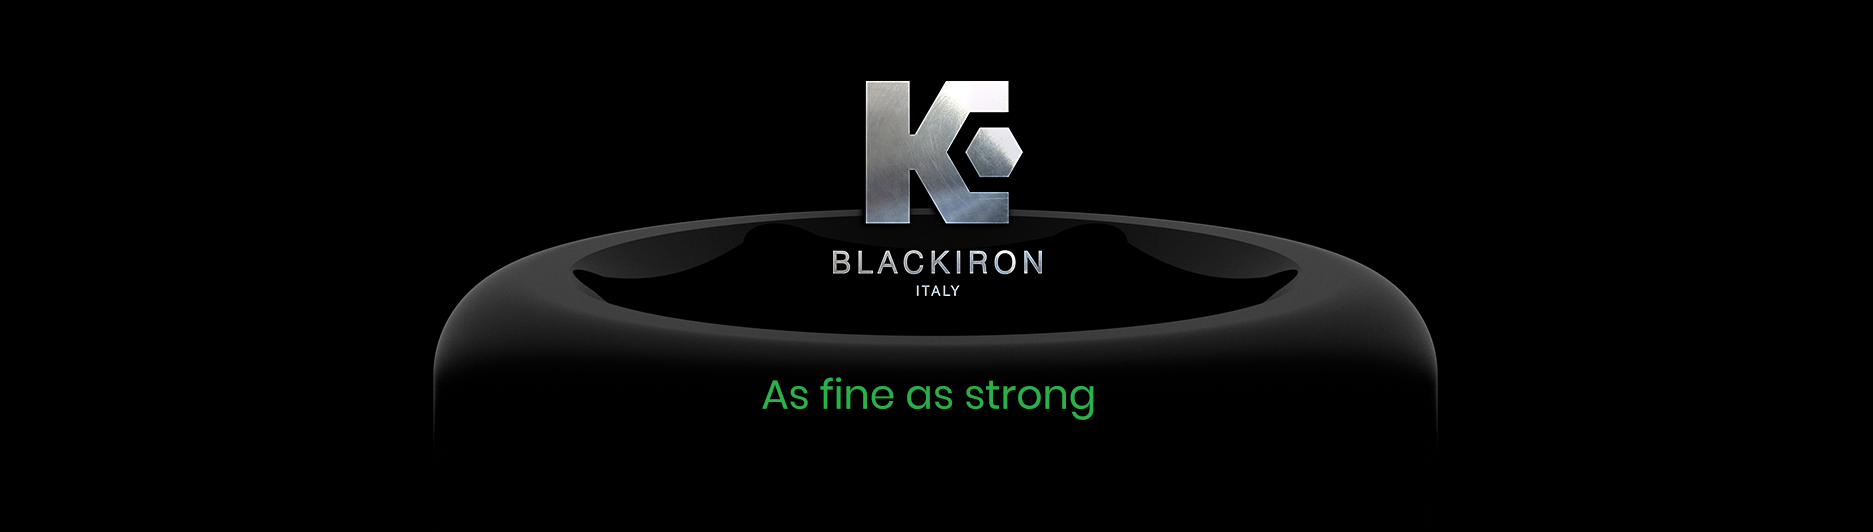 TRS - banner - blackiron.it